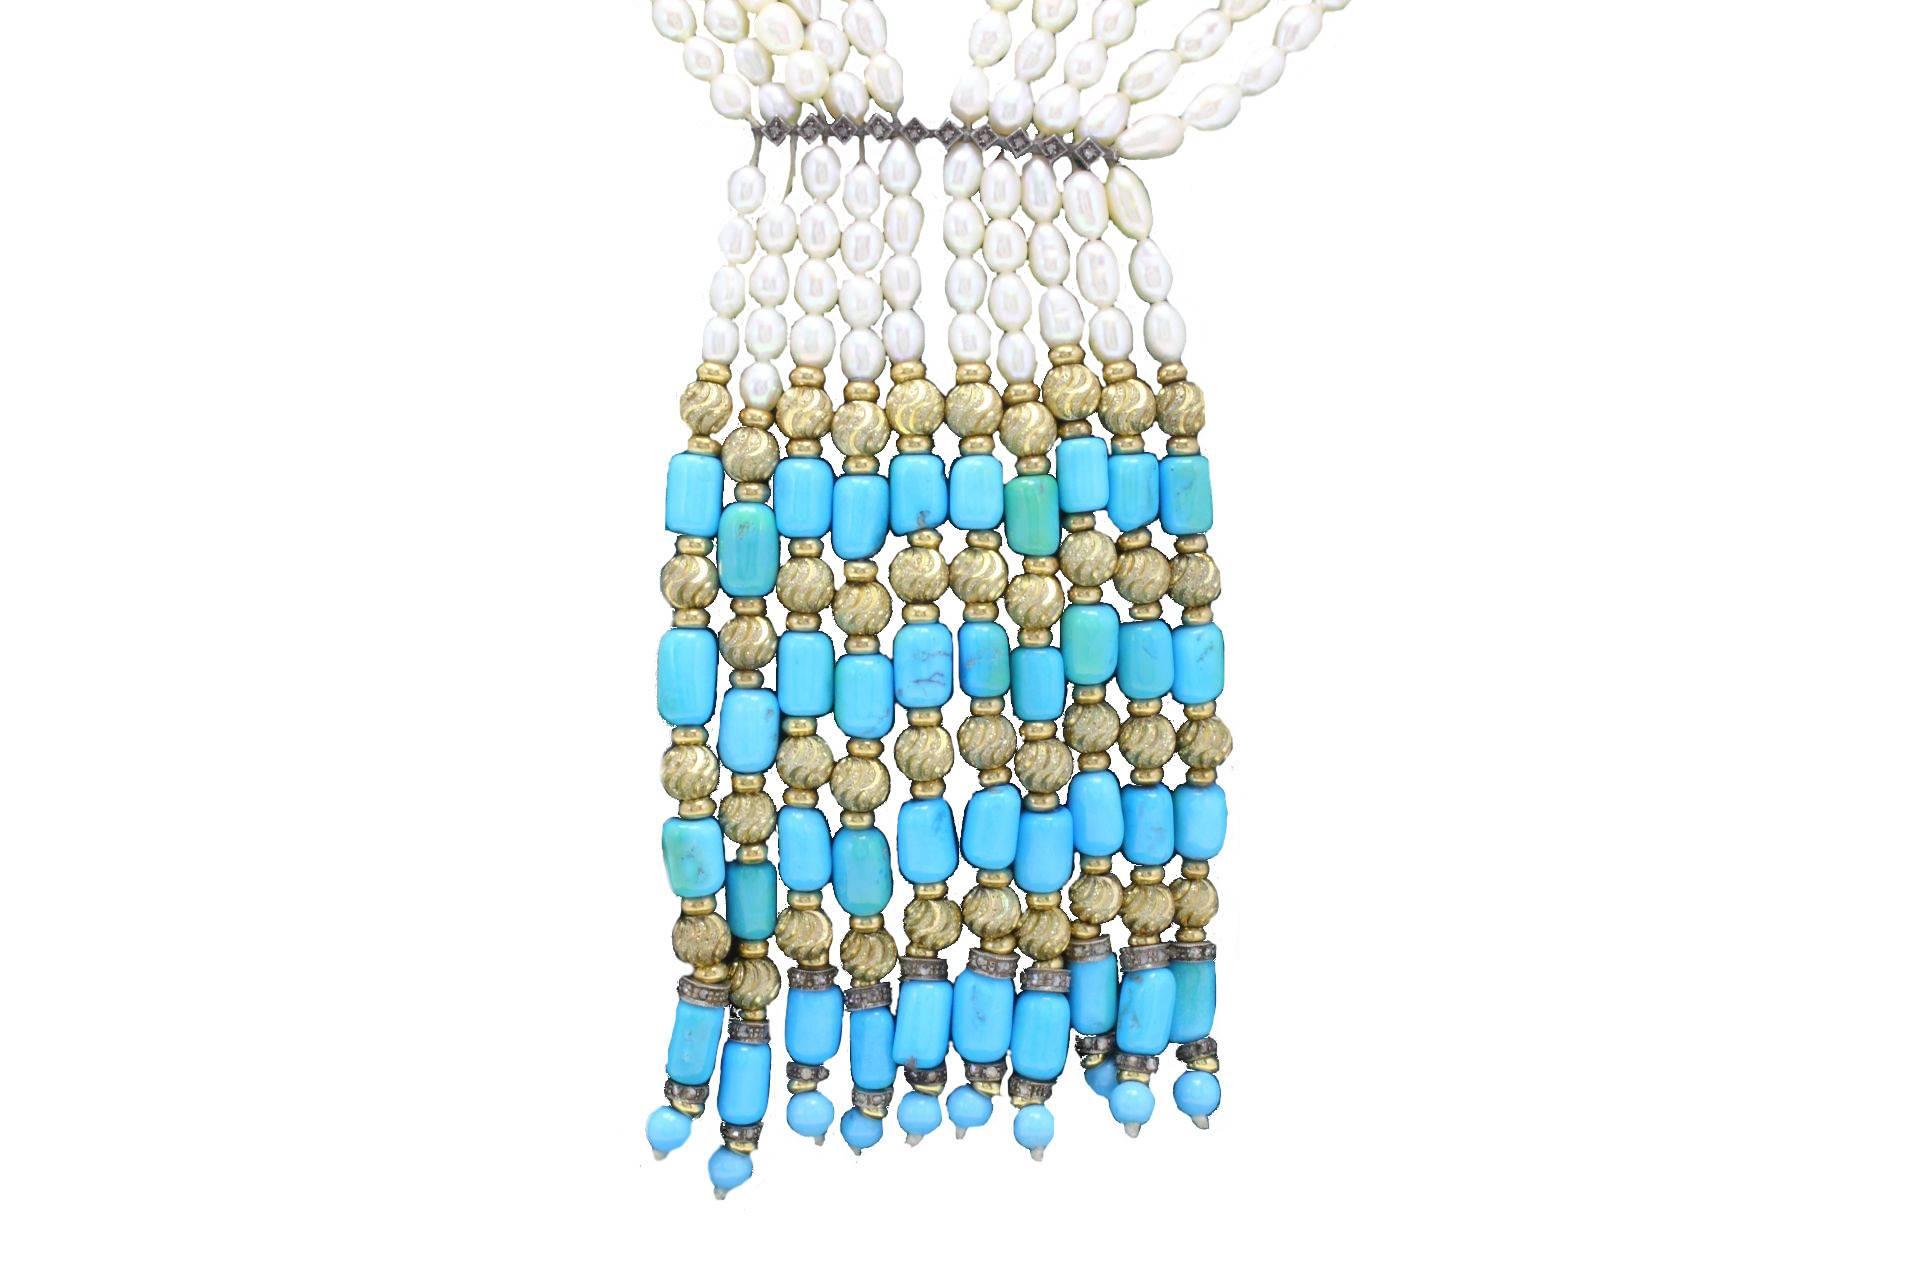 A classic evergreen necklace in gold and silver composed of 10 strands of pearls linked to an alterning of gold and turquoise. in the middle a line of silver covered in diamonds. 

gold 9kt 8.38gr
silver 20.9gr
diamonds 1.10kt
pearls